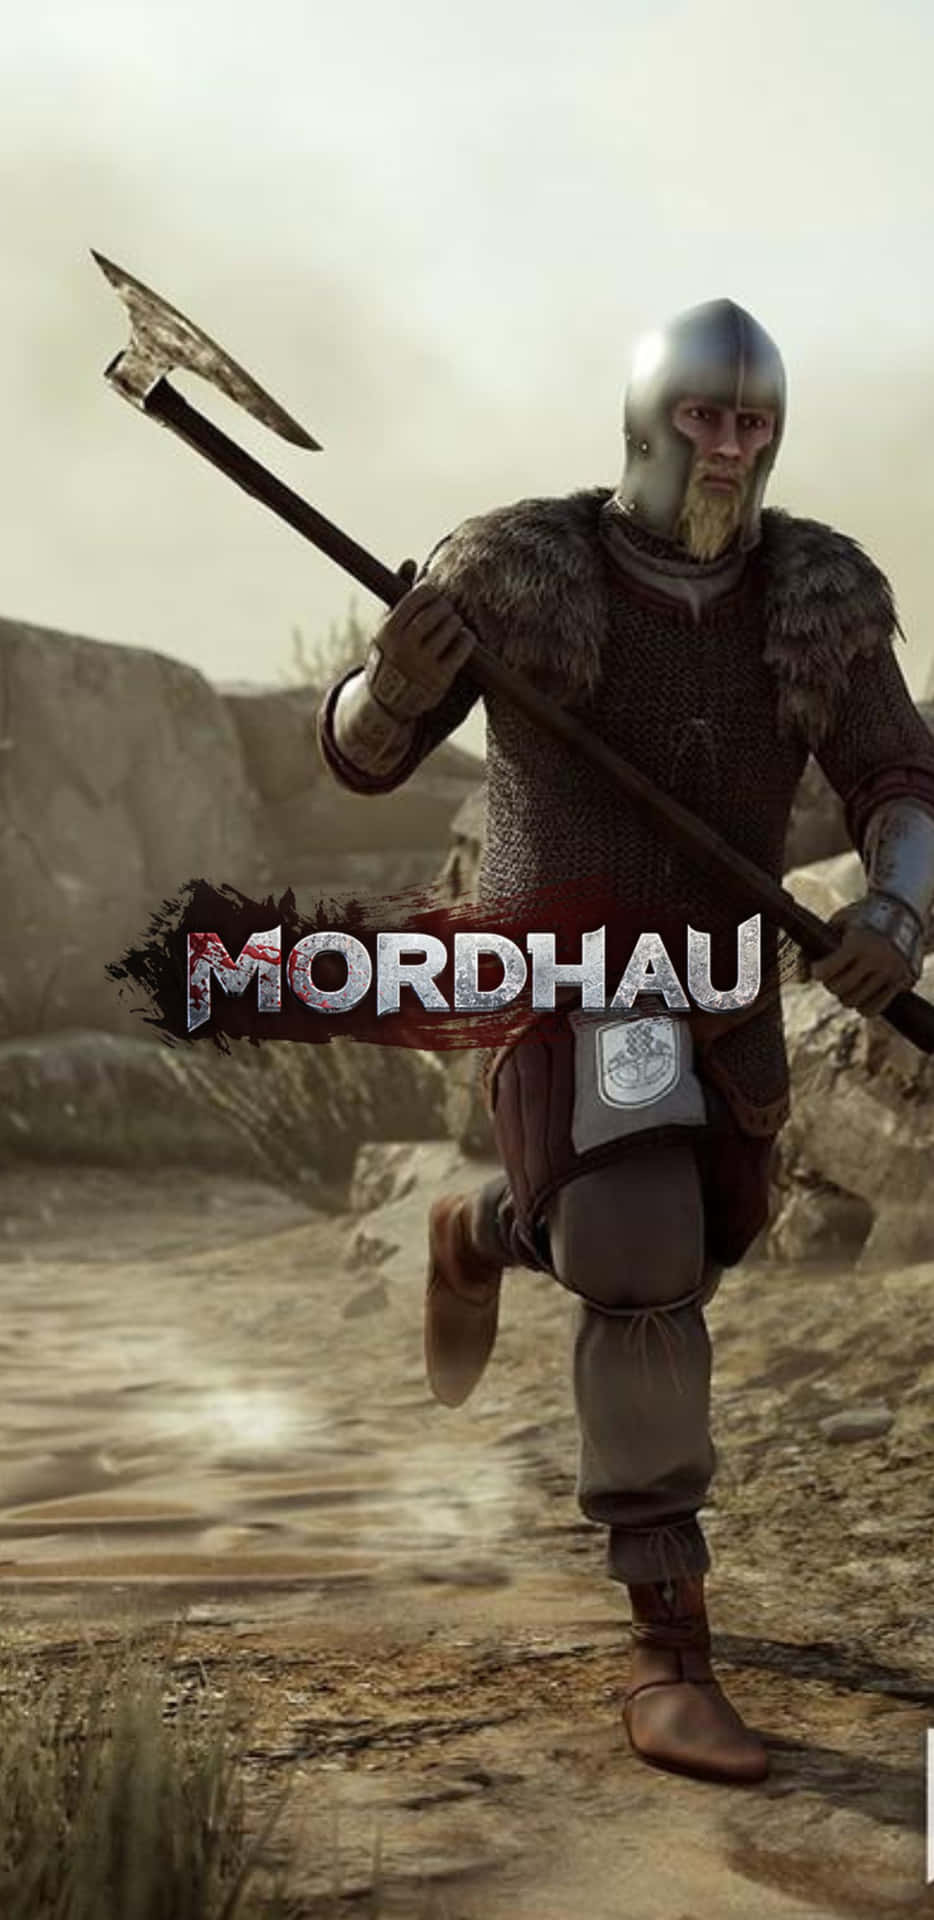 Take your battle into the next level with Pixel 3XL and Mordhau